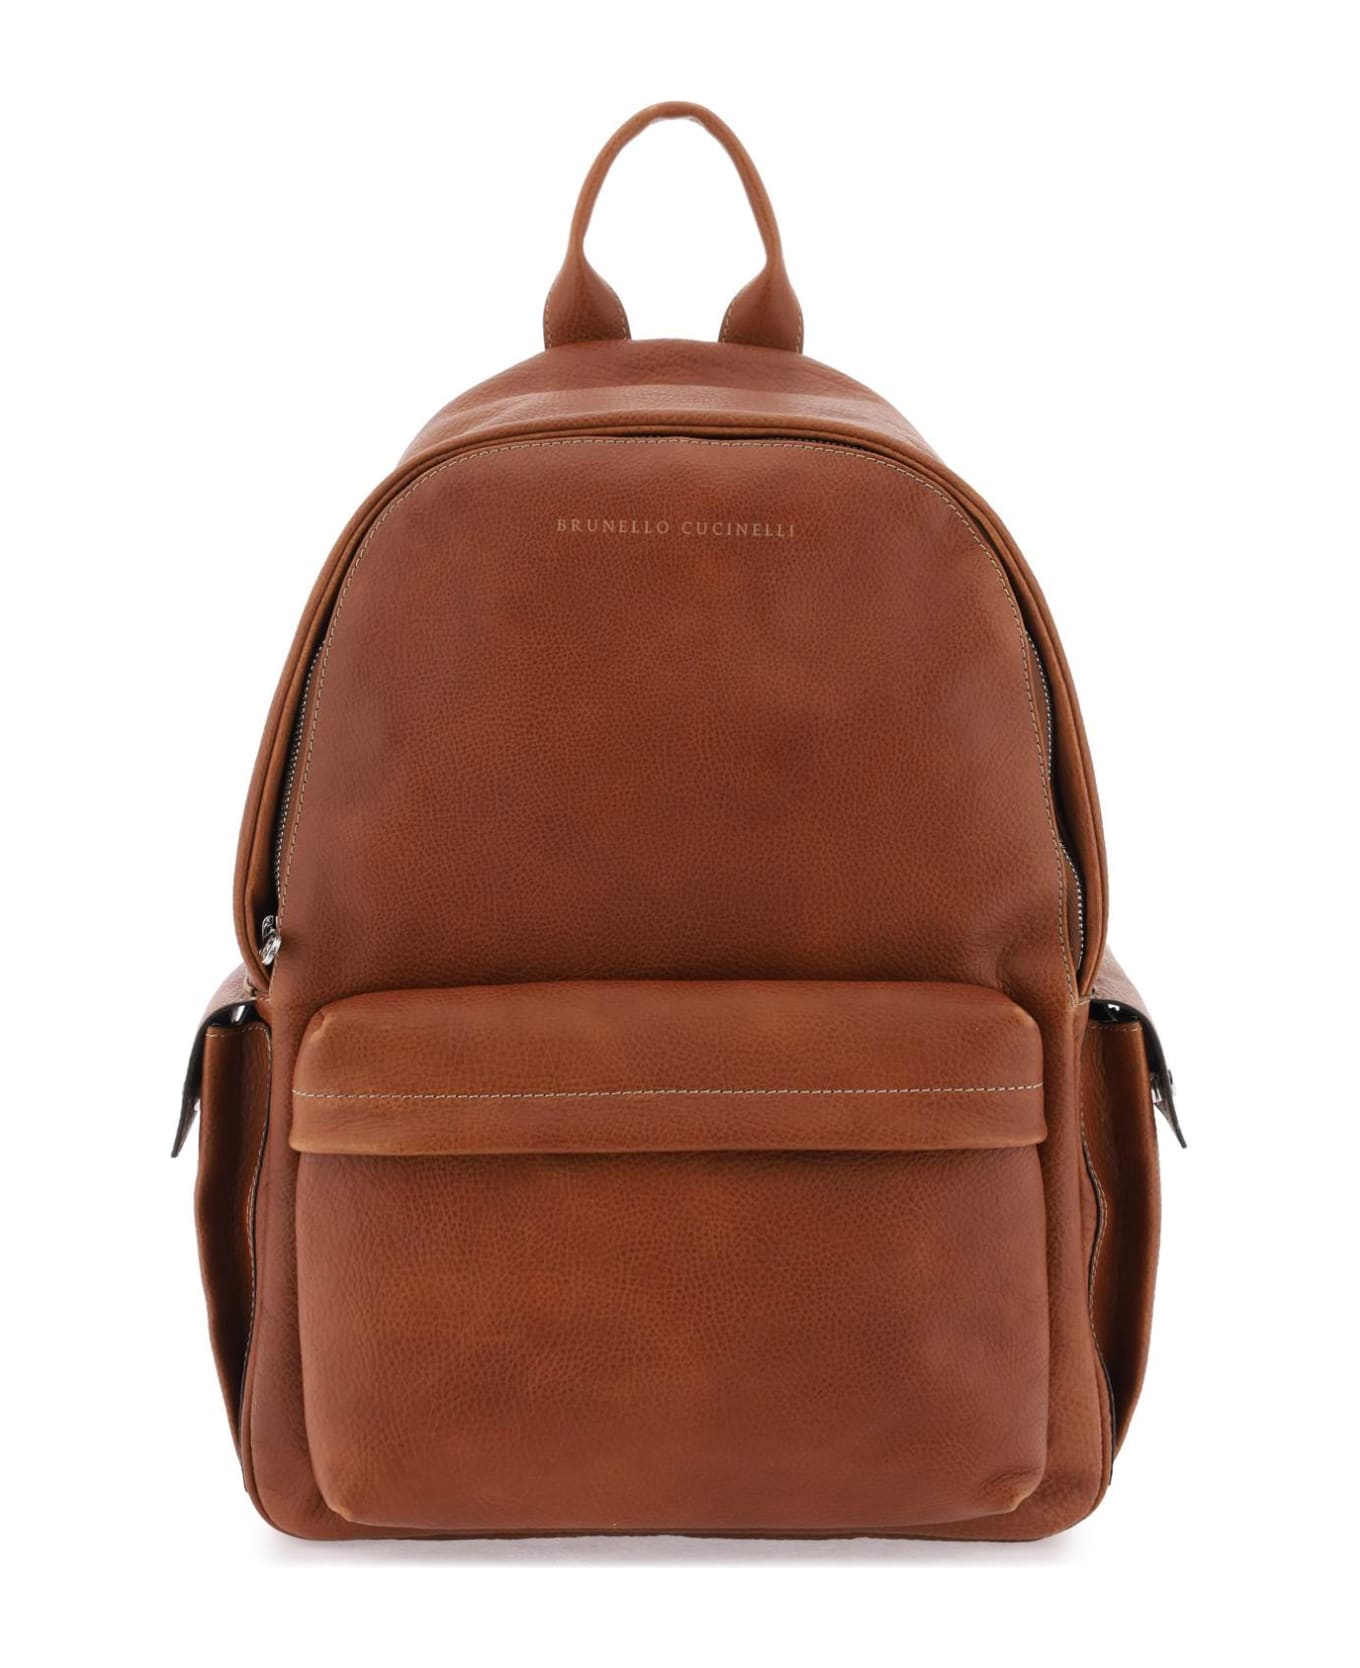 Brunello Cucinelli Leather Backpack - Brown